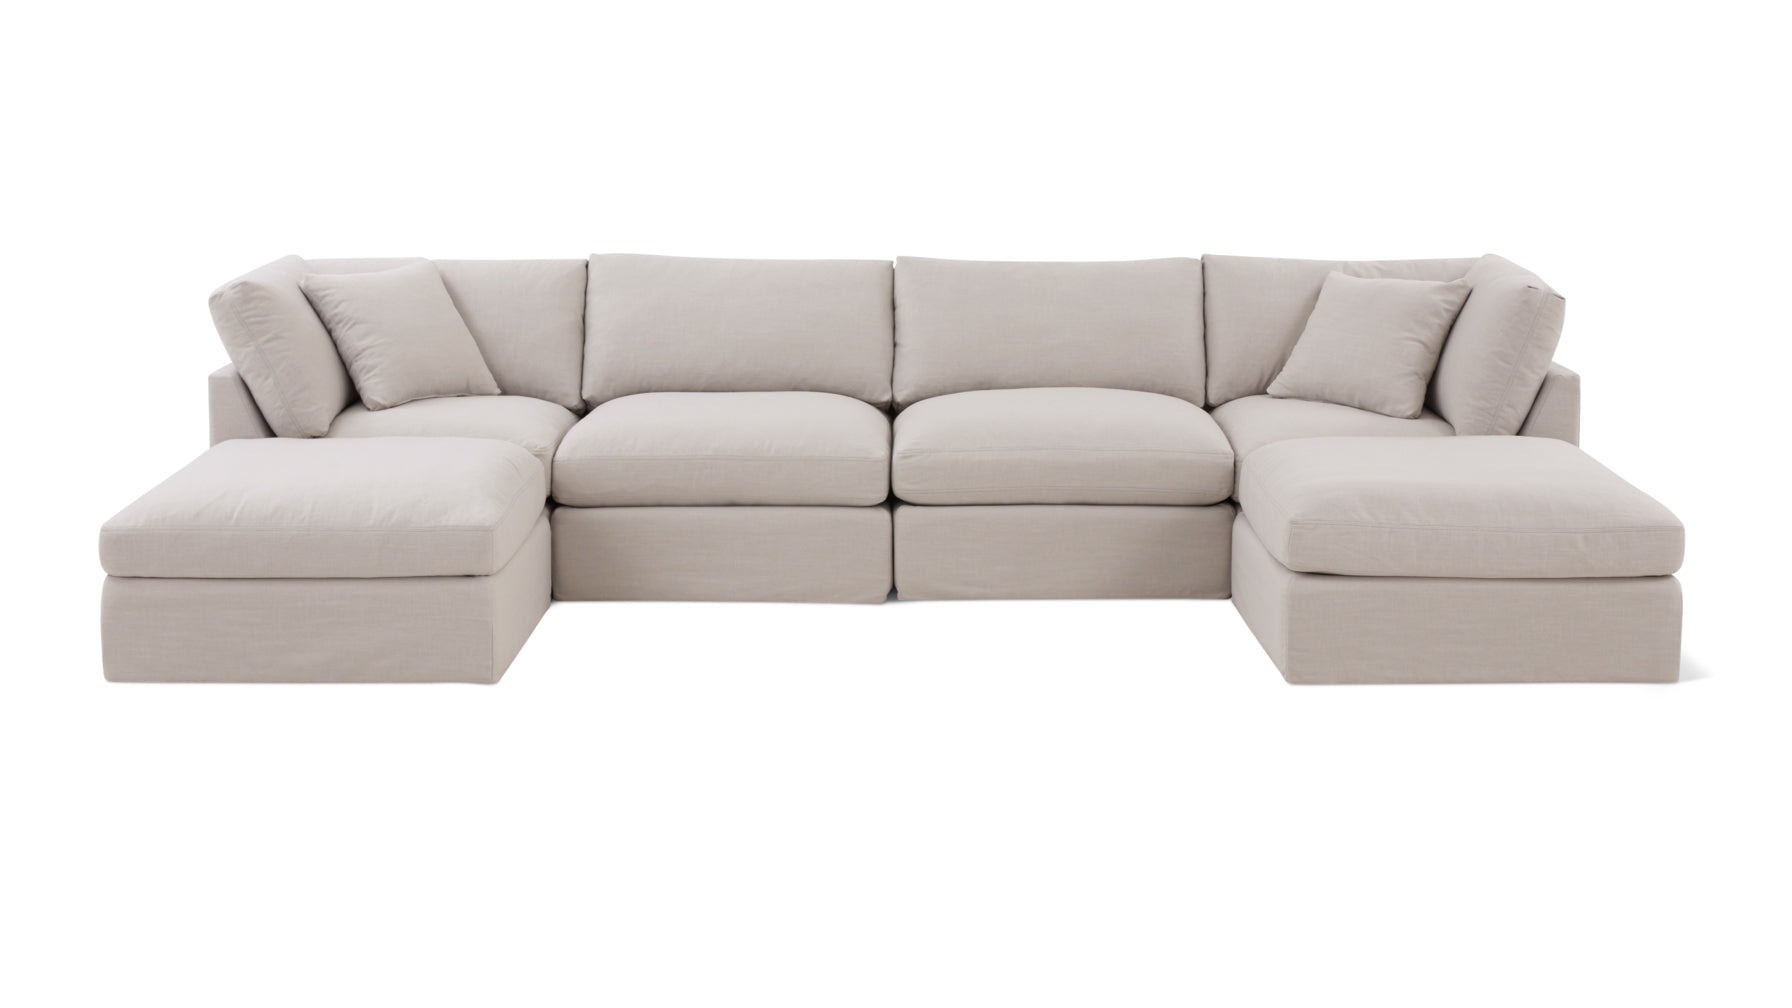 Get Together™ 6-Piece Modular U-Shaped Sectional, Standard, Clay - Image 1